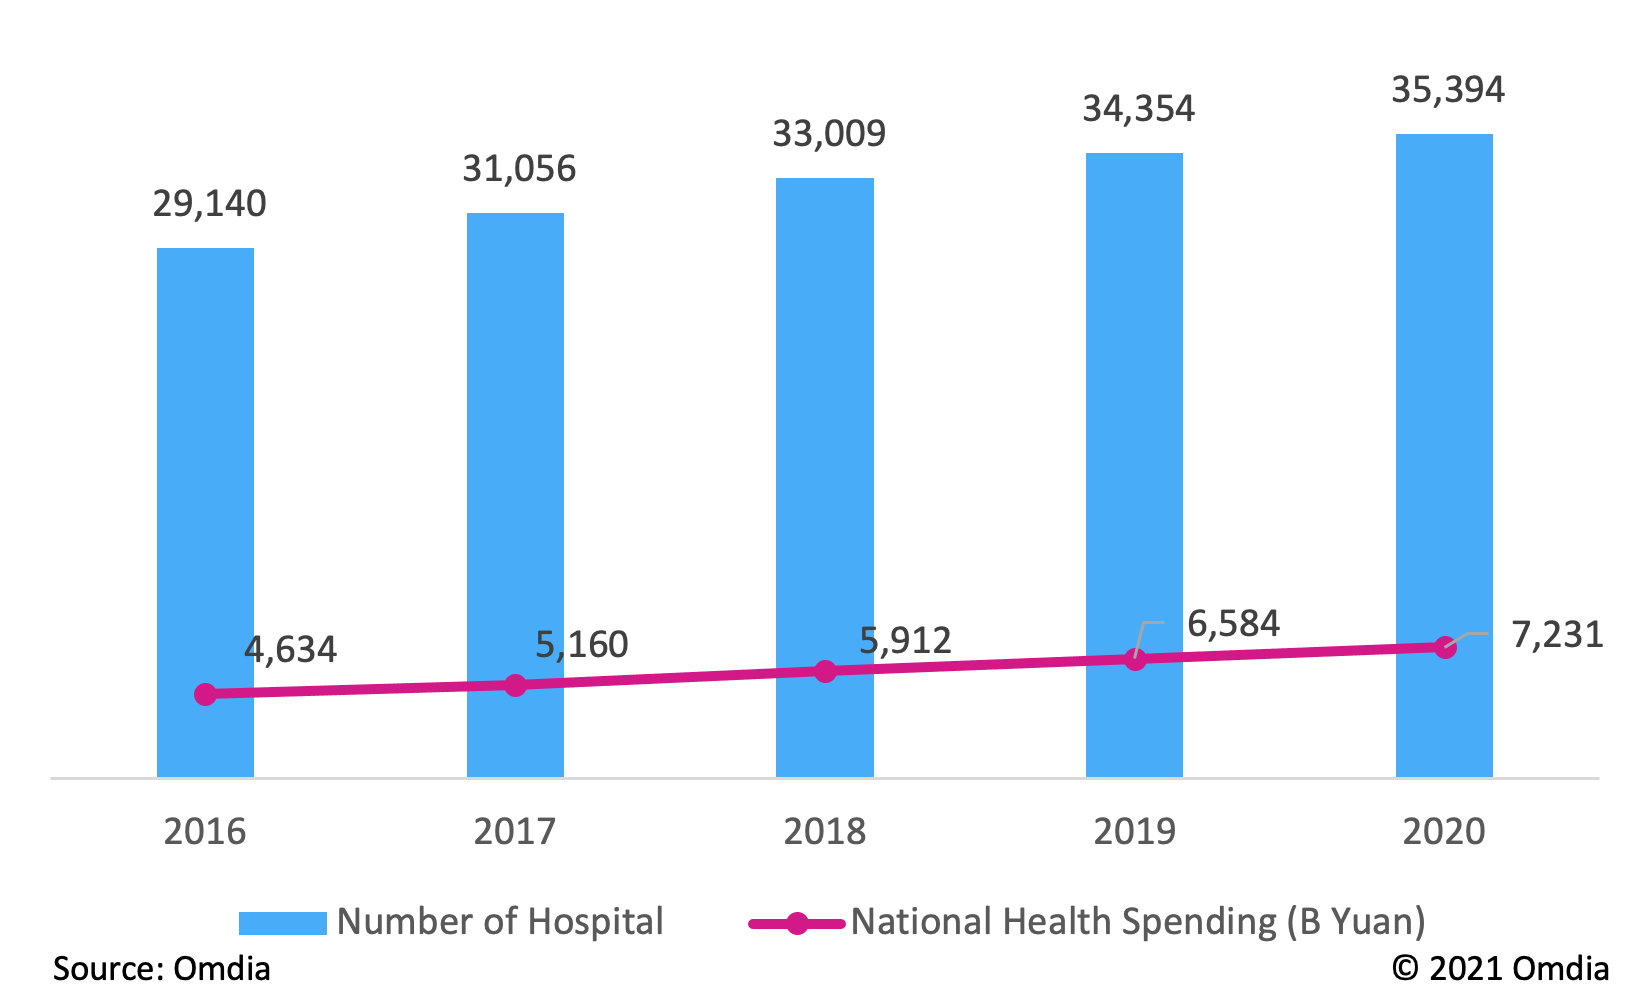 Number of Hospital and Health Spending in China between 2016 and 2020